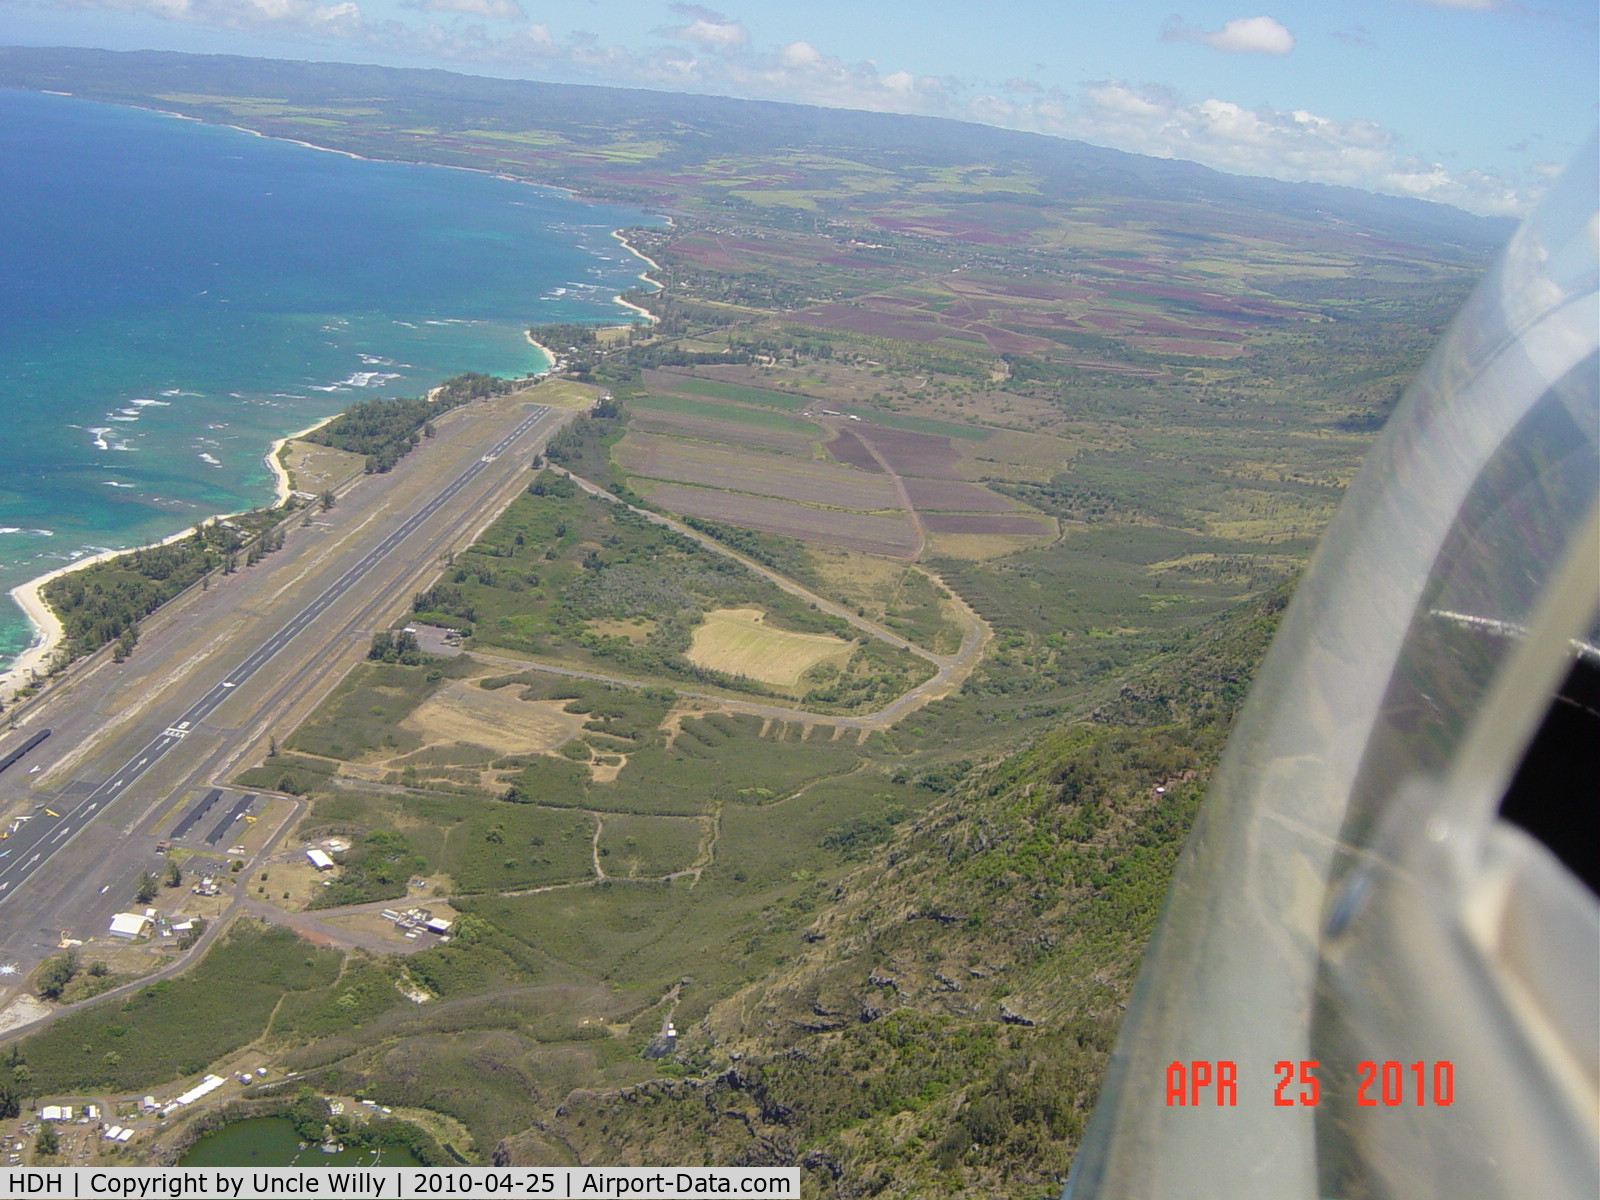 Dillingham Airfield Airport (HDH) - View of HDH RWY 08 - gliders in foreground, skydivers at far end.